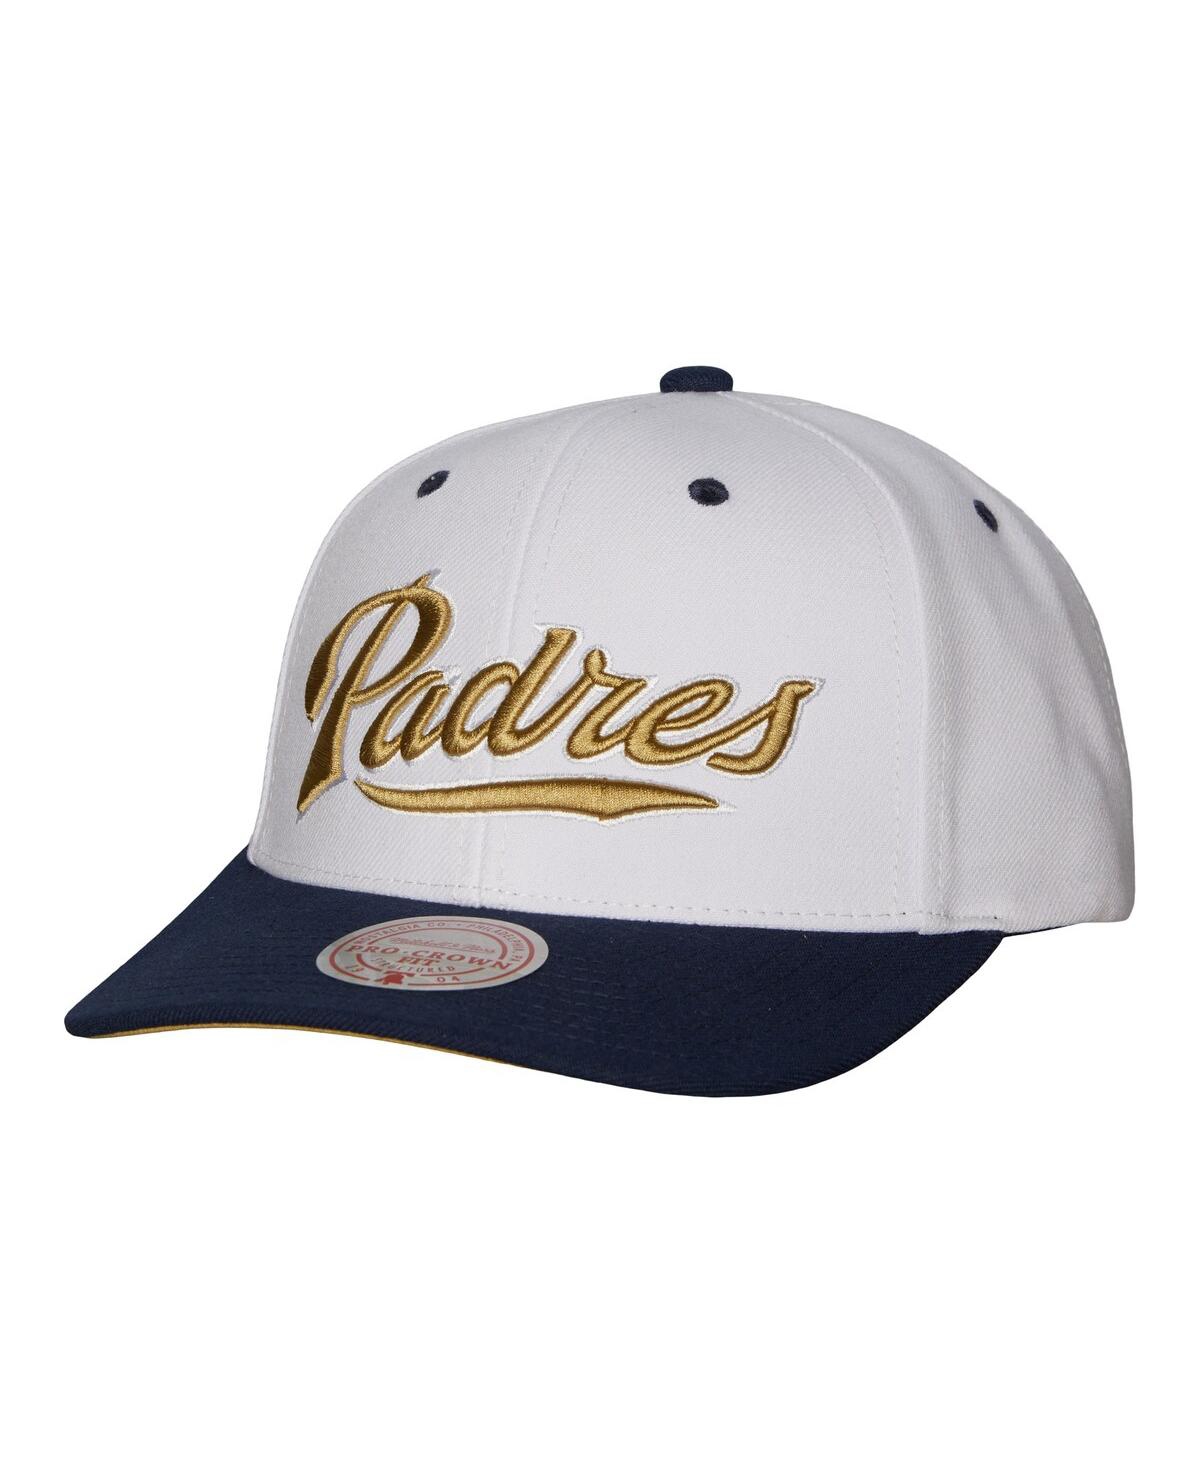 Mitchell & Ness Men's  White San Diego Padres Cooperstown Collection Pro Crown Snapback Hat